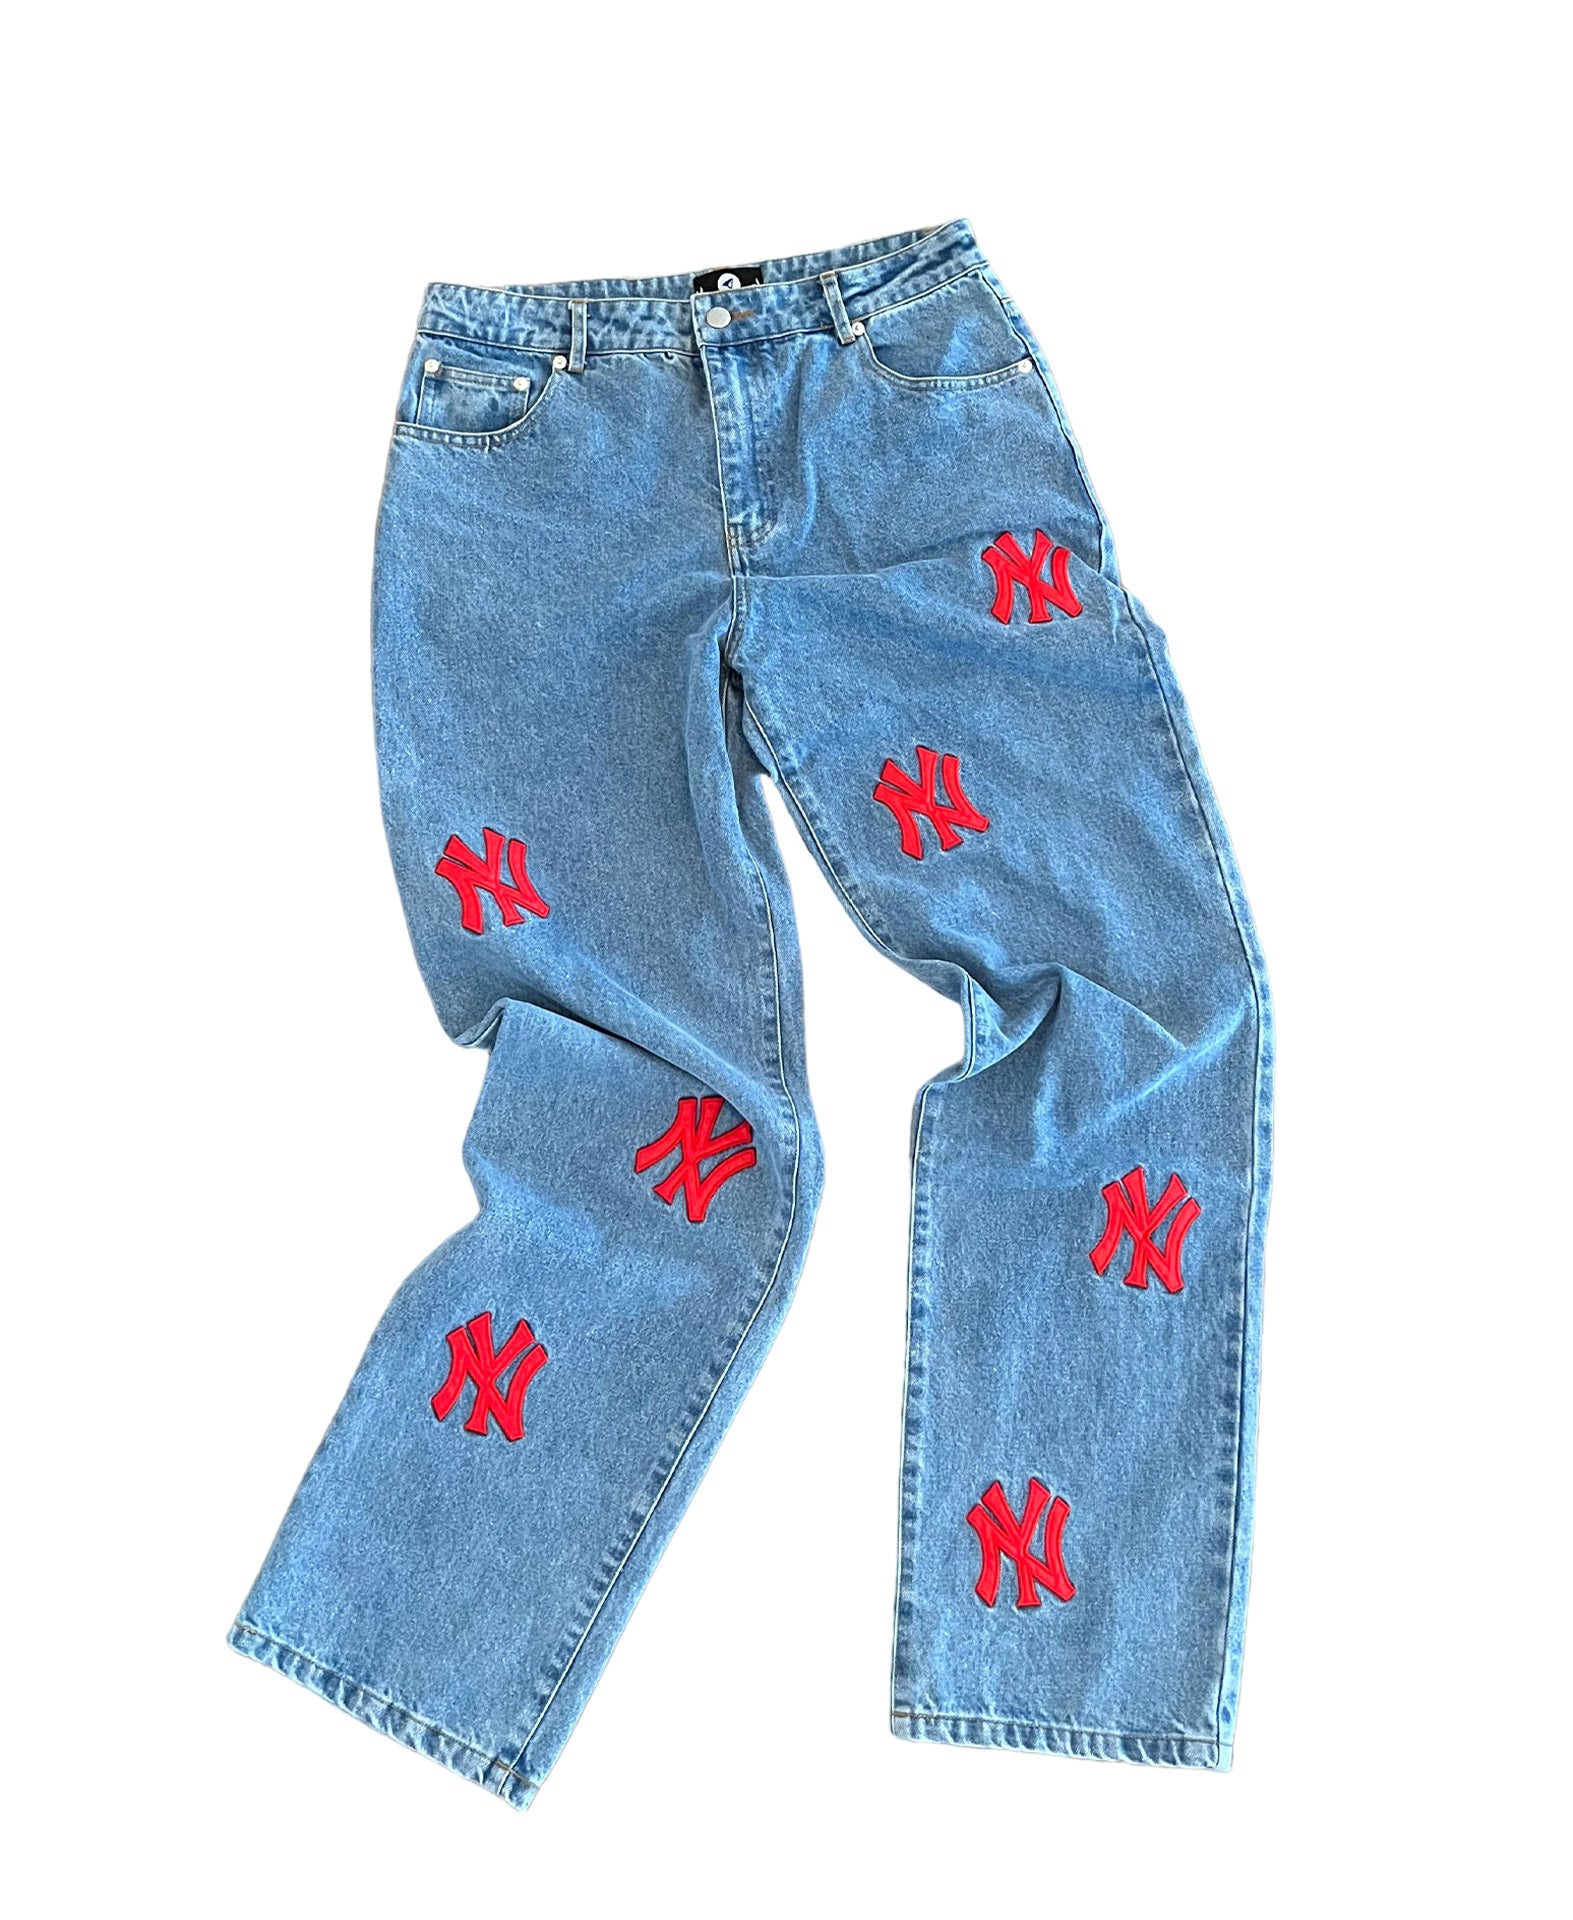 New York Patch Jeans - Blue wash – ABSTRACTBYJULES